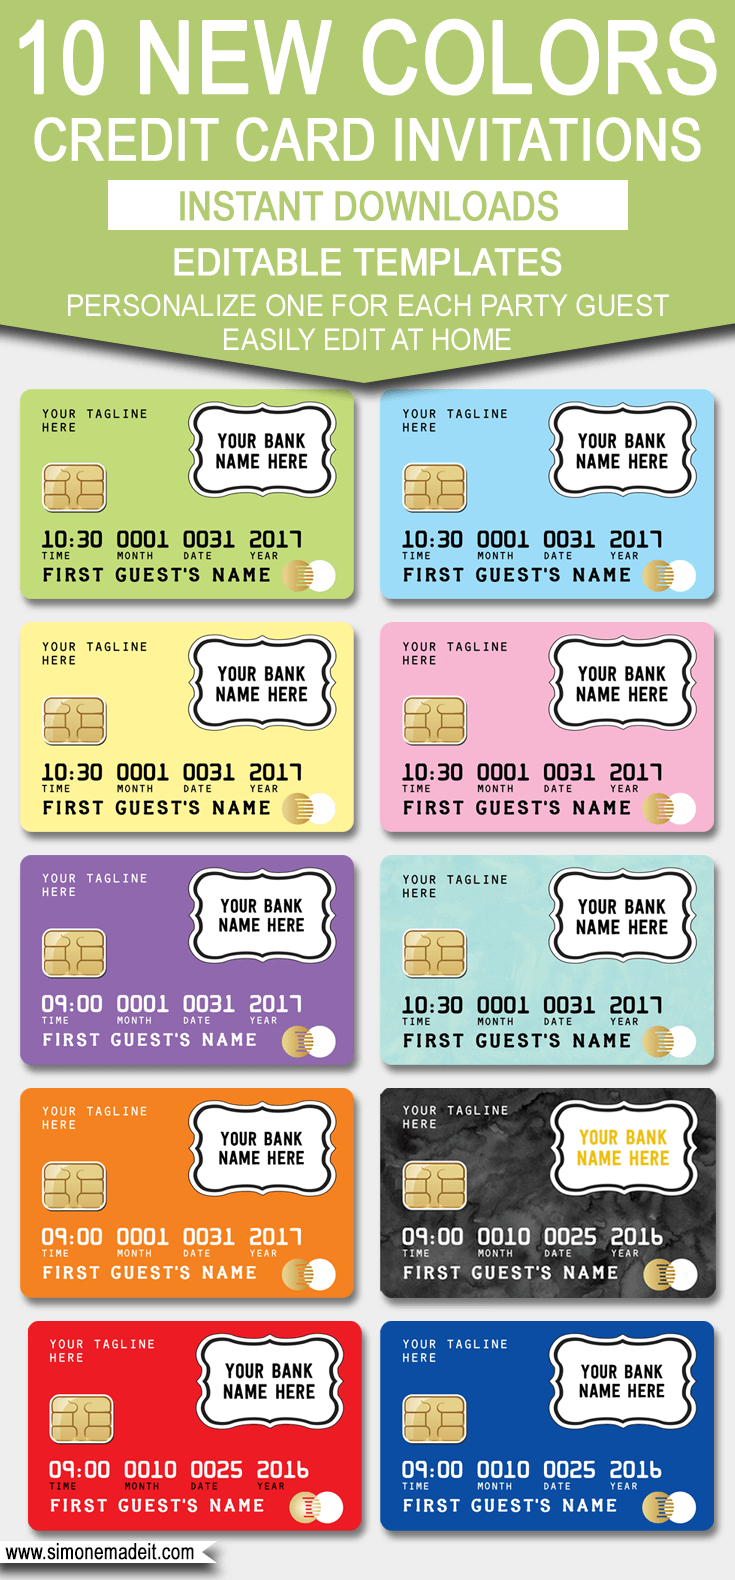 Credit Card Invitation Template – New Colors! | Mall Throughout Credit Card Template For Kids